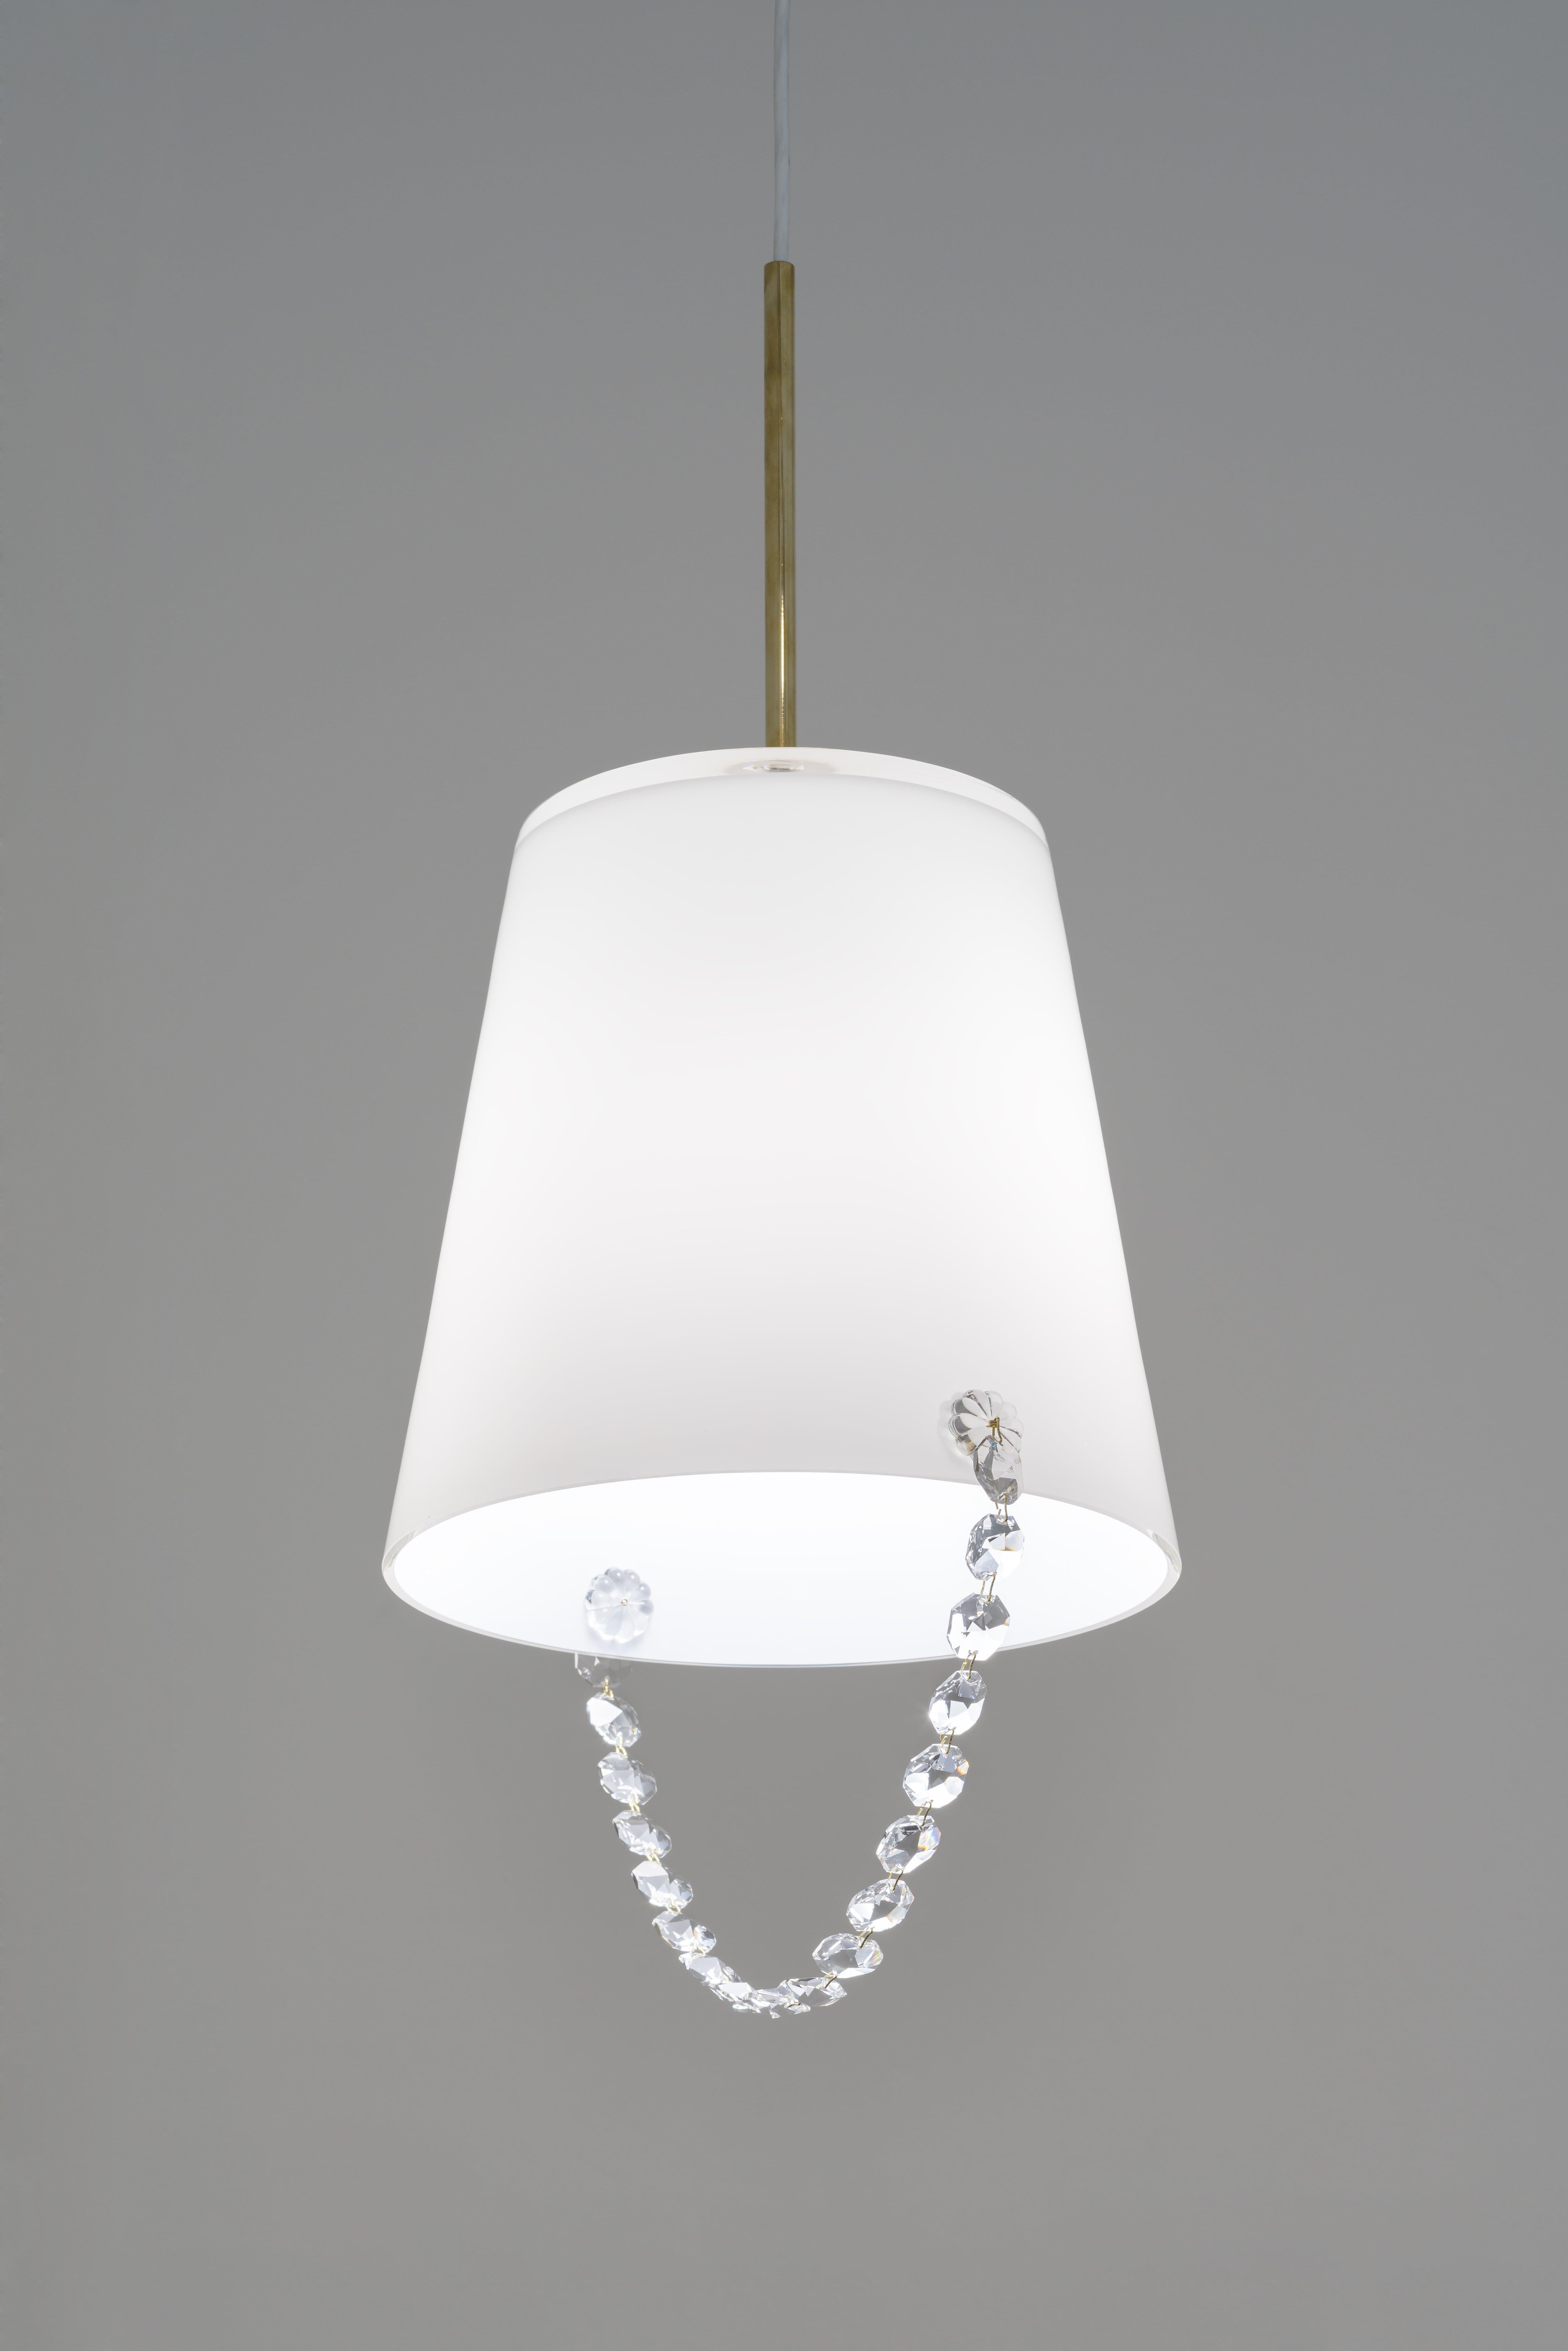 Bucket of Winnerpendant lamp by HG Atelier
Dimensions: D 31 x H 49 cm
Materials: White / clear glass, crystal beads, hand blown glass

HG Atelier Design focuses on design and production of lights and lighted objects. We specialize in developing